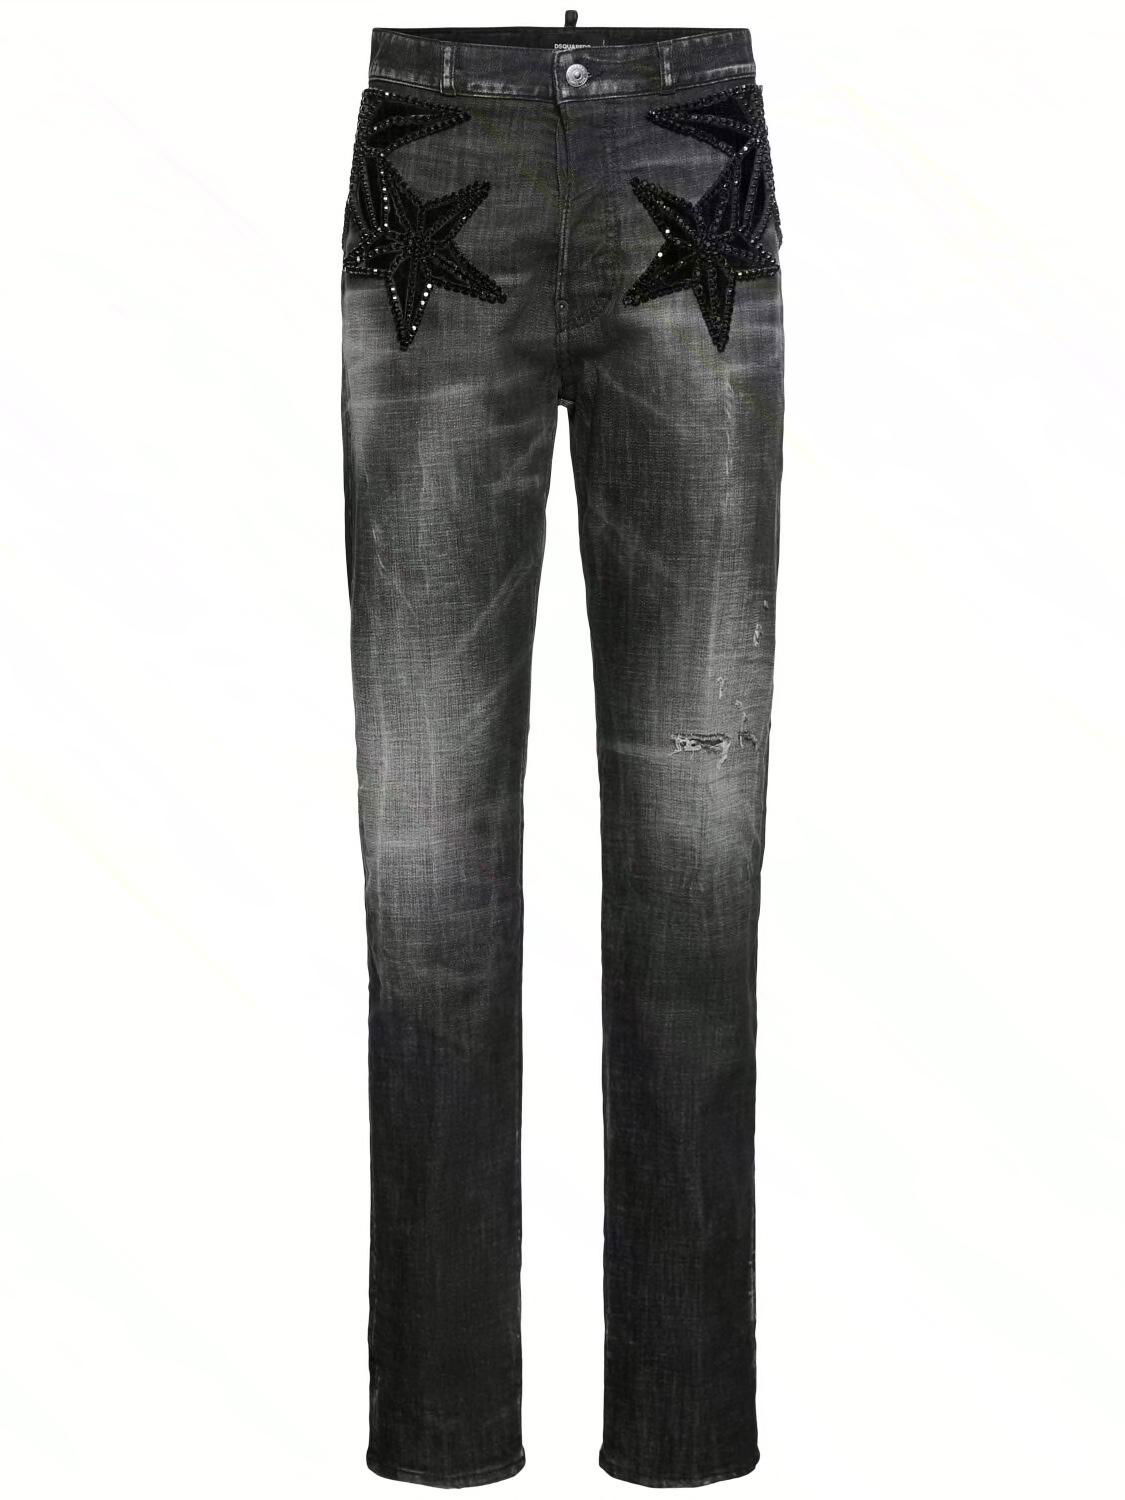 642 Embellished Stars High Rise Jeans by DSQUARED2